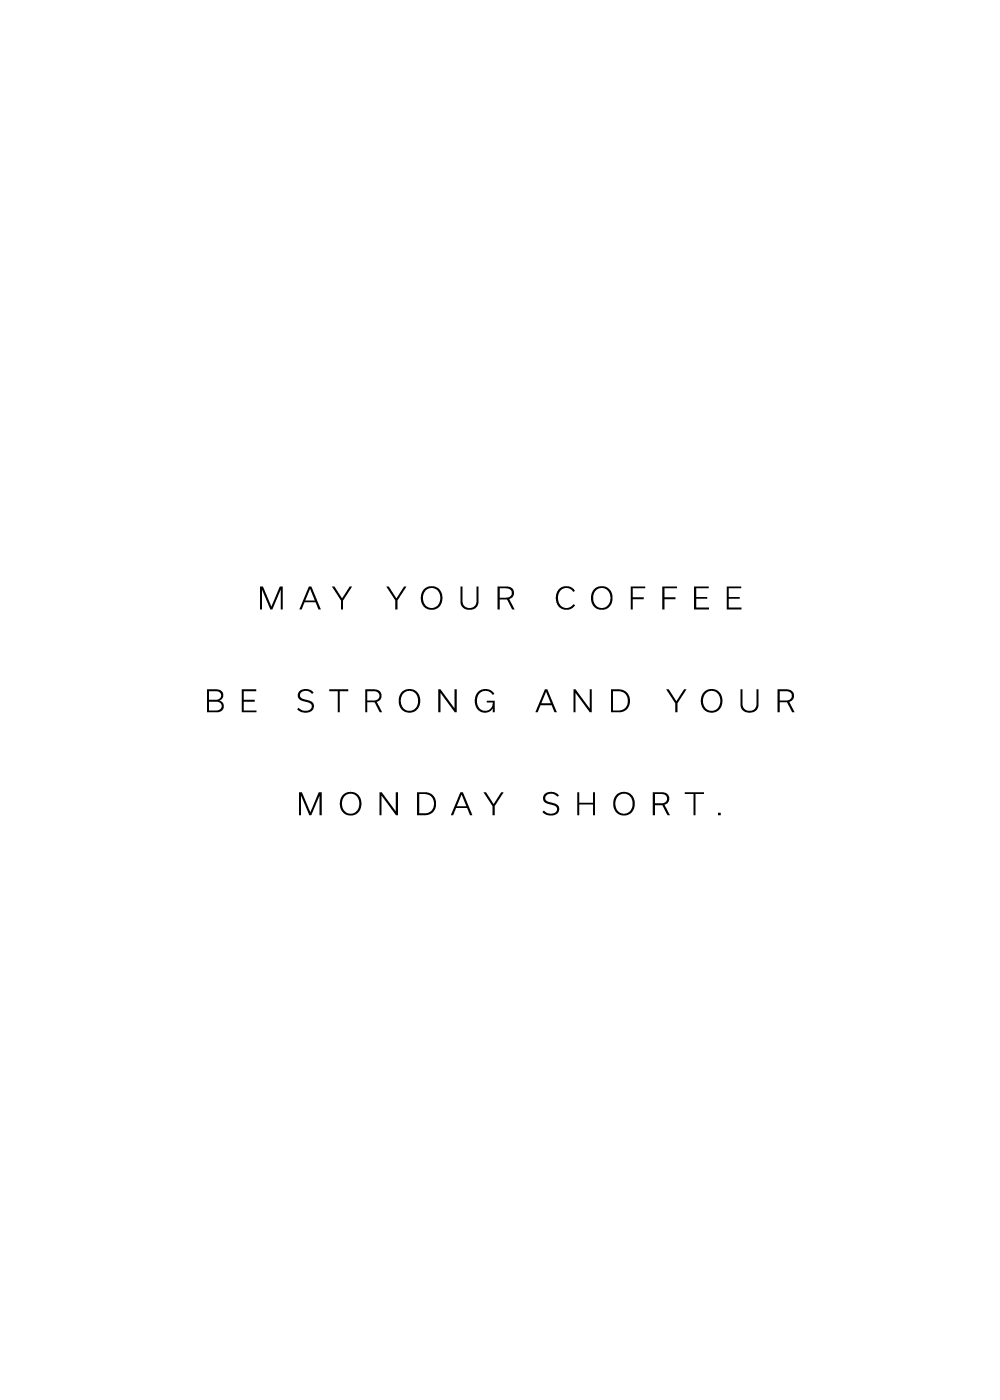 "May your coffee be strong and your monday short" citatplakat